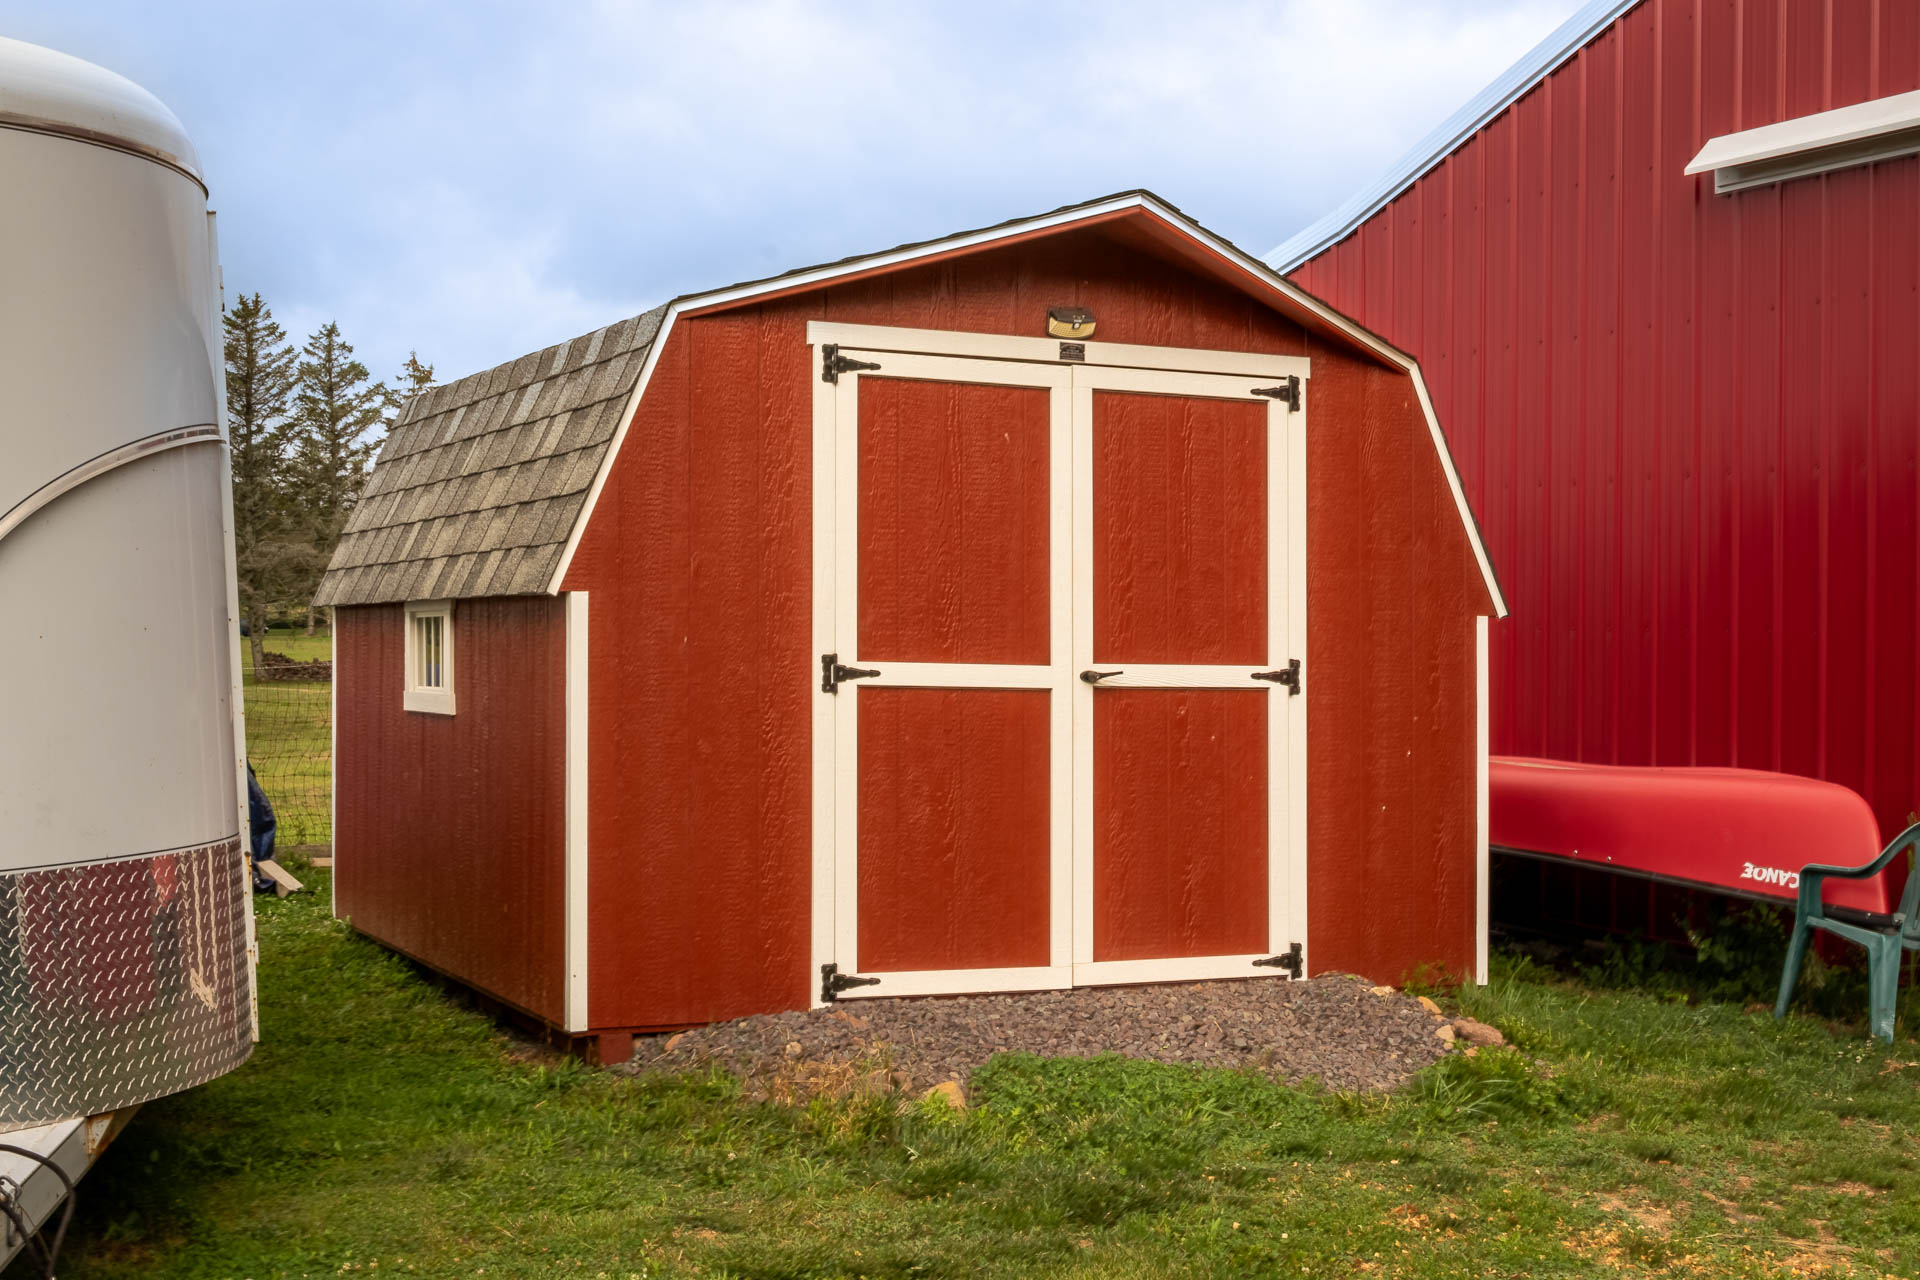 10x10 shed in Weatherly, PA.